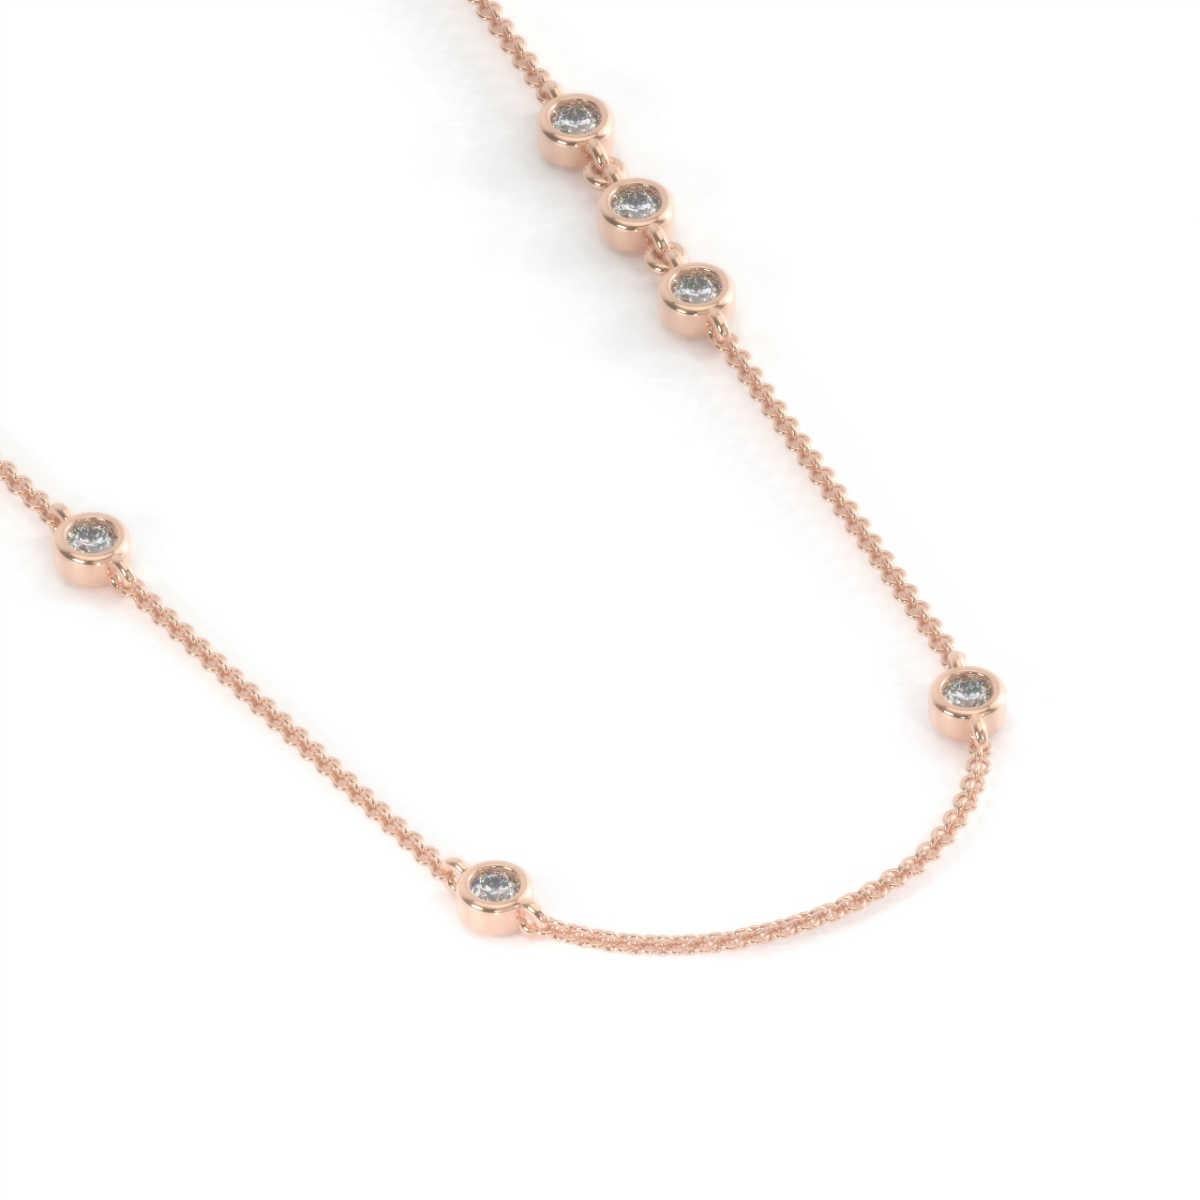 This delicate necklace features six (6) round brilliant diamonds stations bezel set. Experience the difference!

Product details: 

Center Gemstone Type: NATURAL DIAMOND
Center Gemstone Color: WHITE
Center Gemstone Shape: ROUND
Metal: 18K Rose